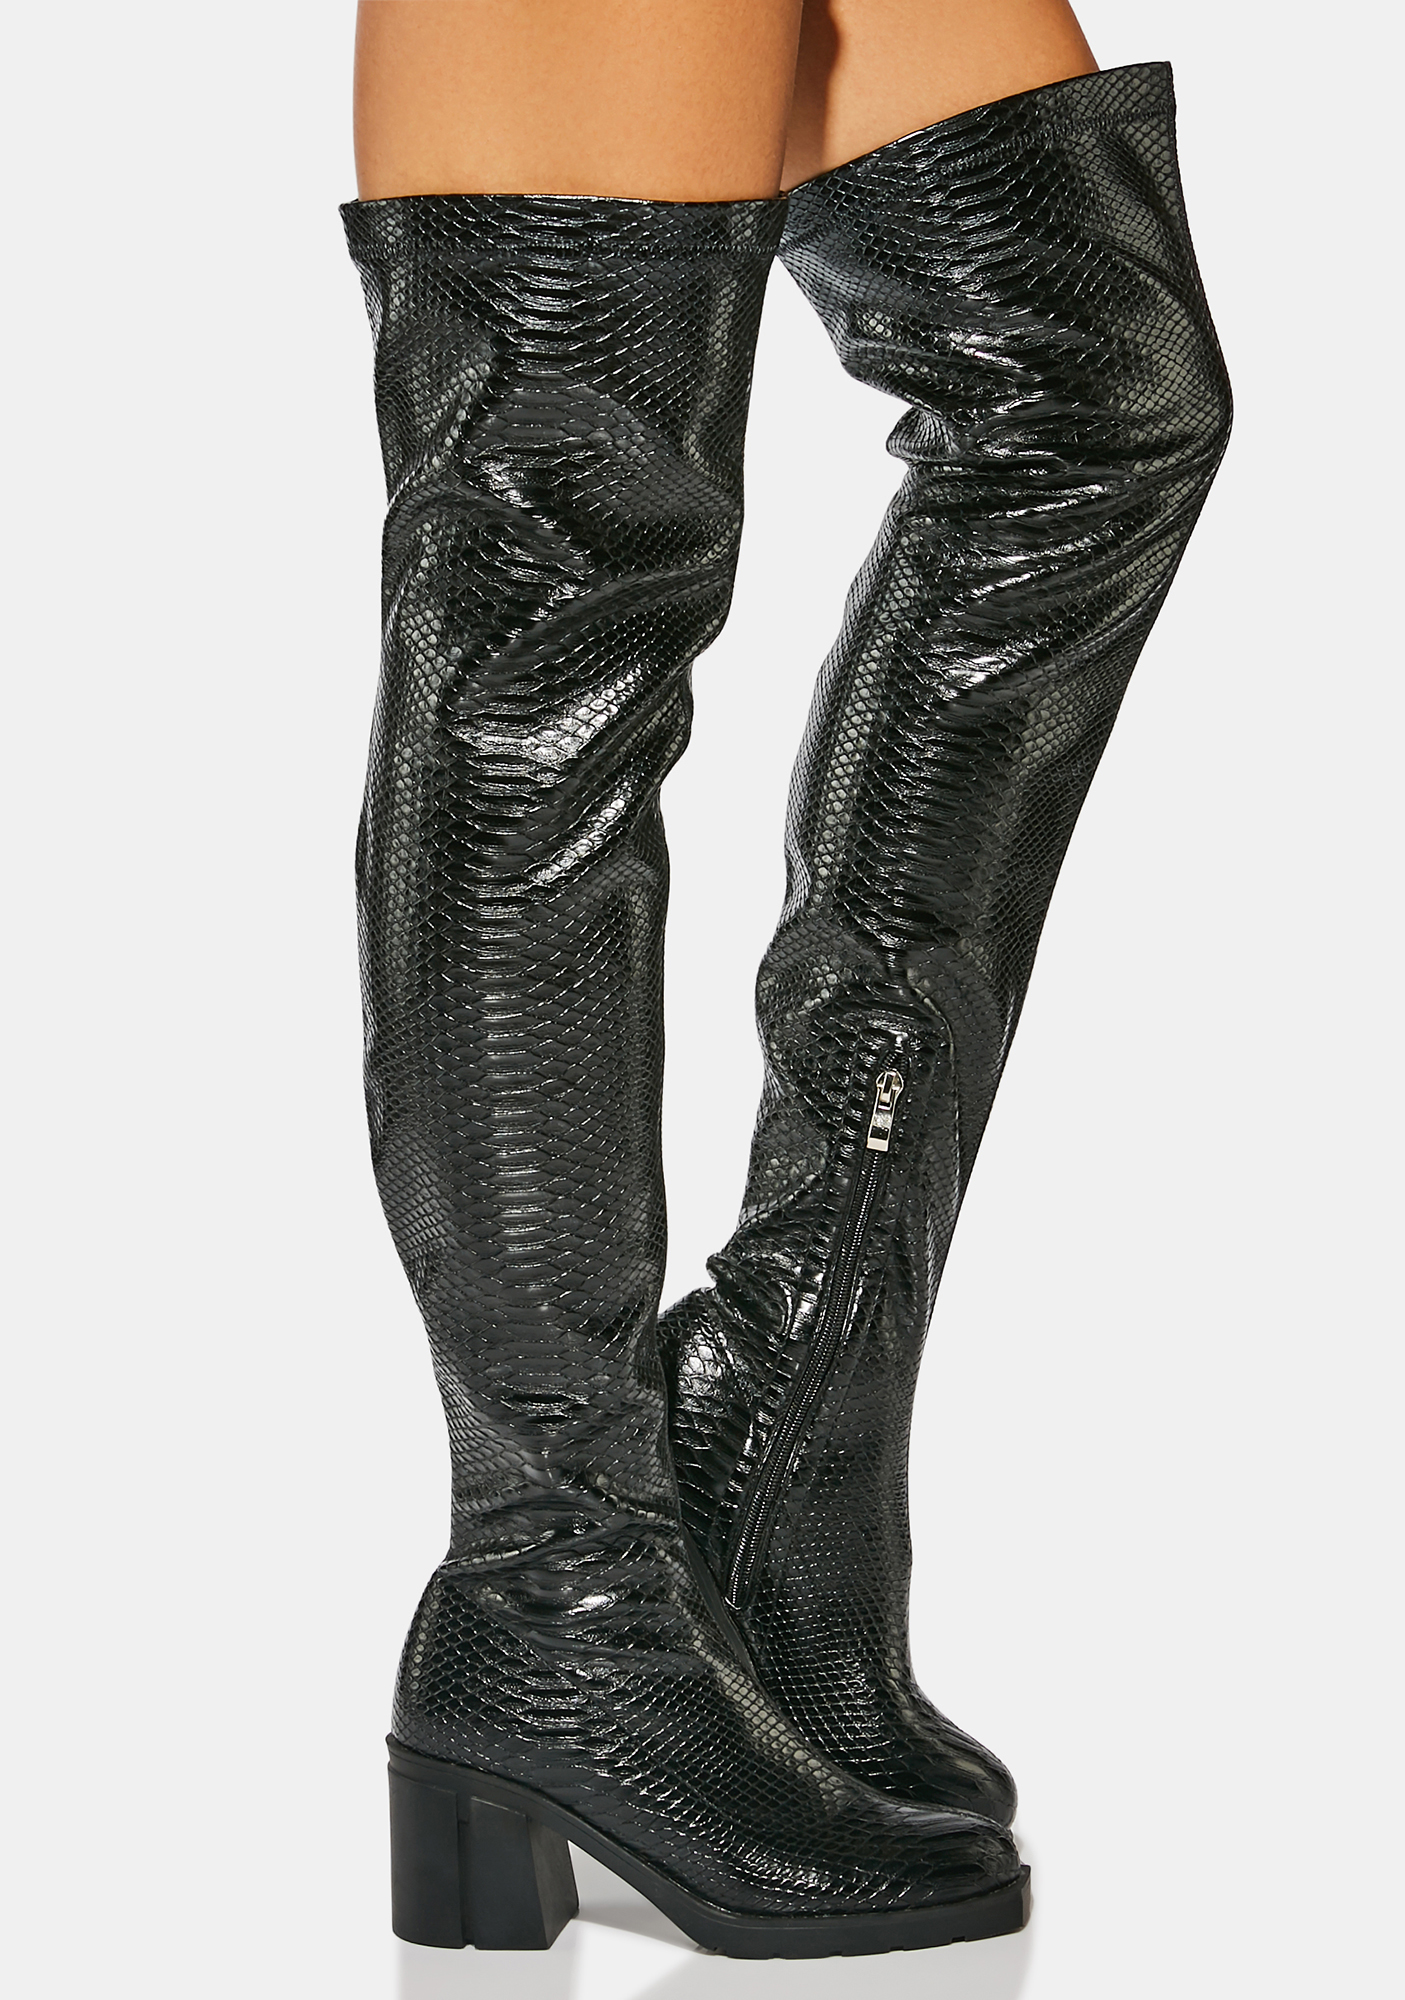 Azalea Wang See Me In Your Dreams Thigh High Boots- Black | Dolls Kill